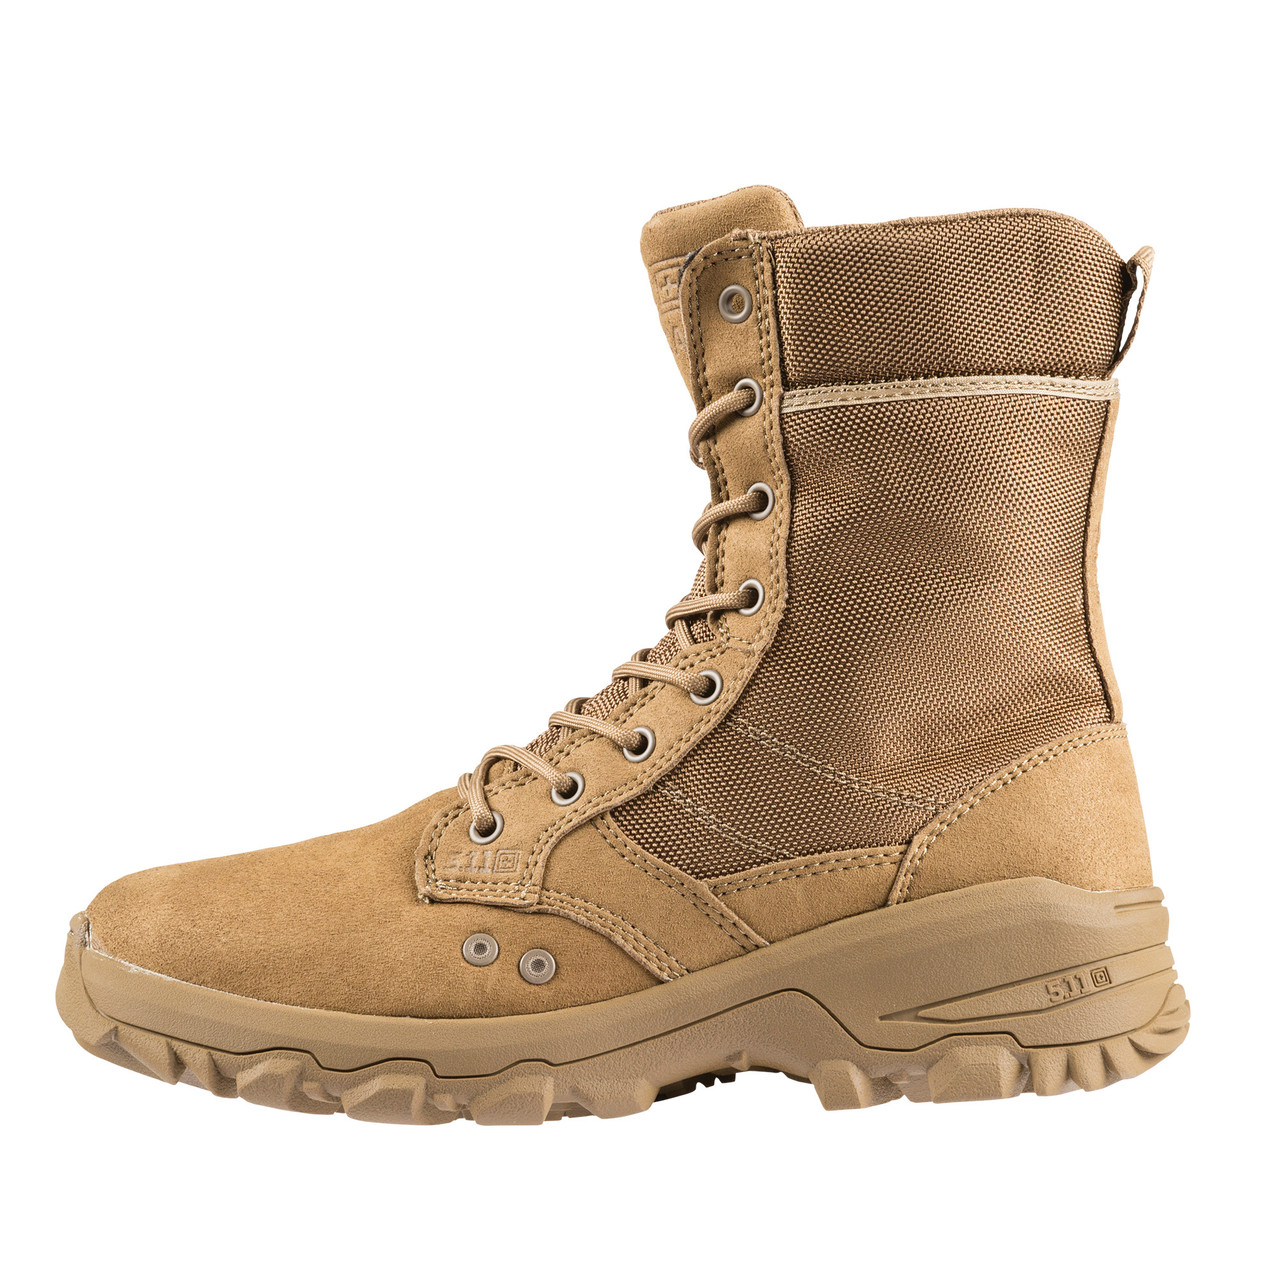 5.11 Tactical | Speed 3.0 Jungle RapidDry Boots - Dark Coyote